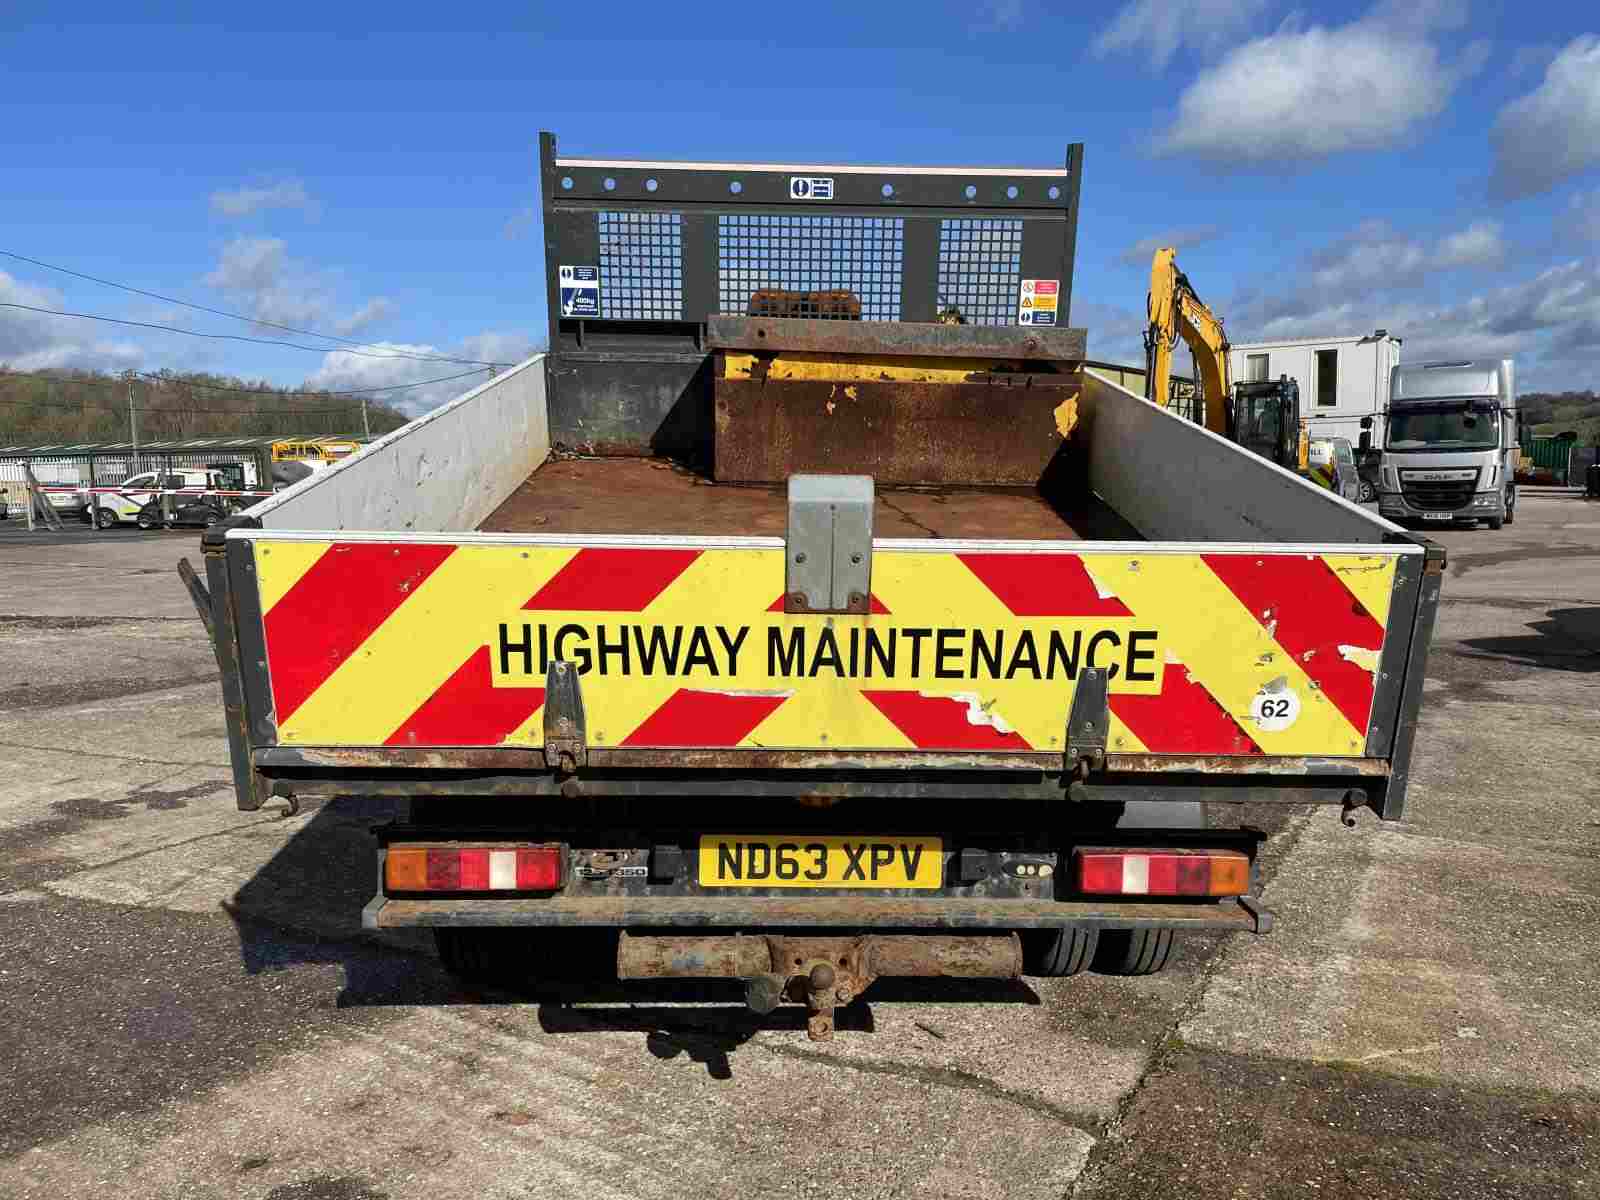 Used 2014 FORD Transit 350-125 lwb Crew Tipper for sale